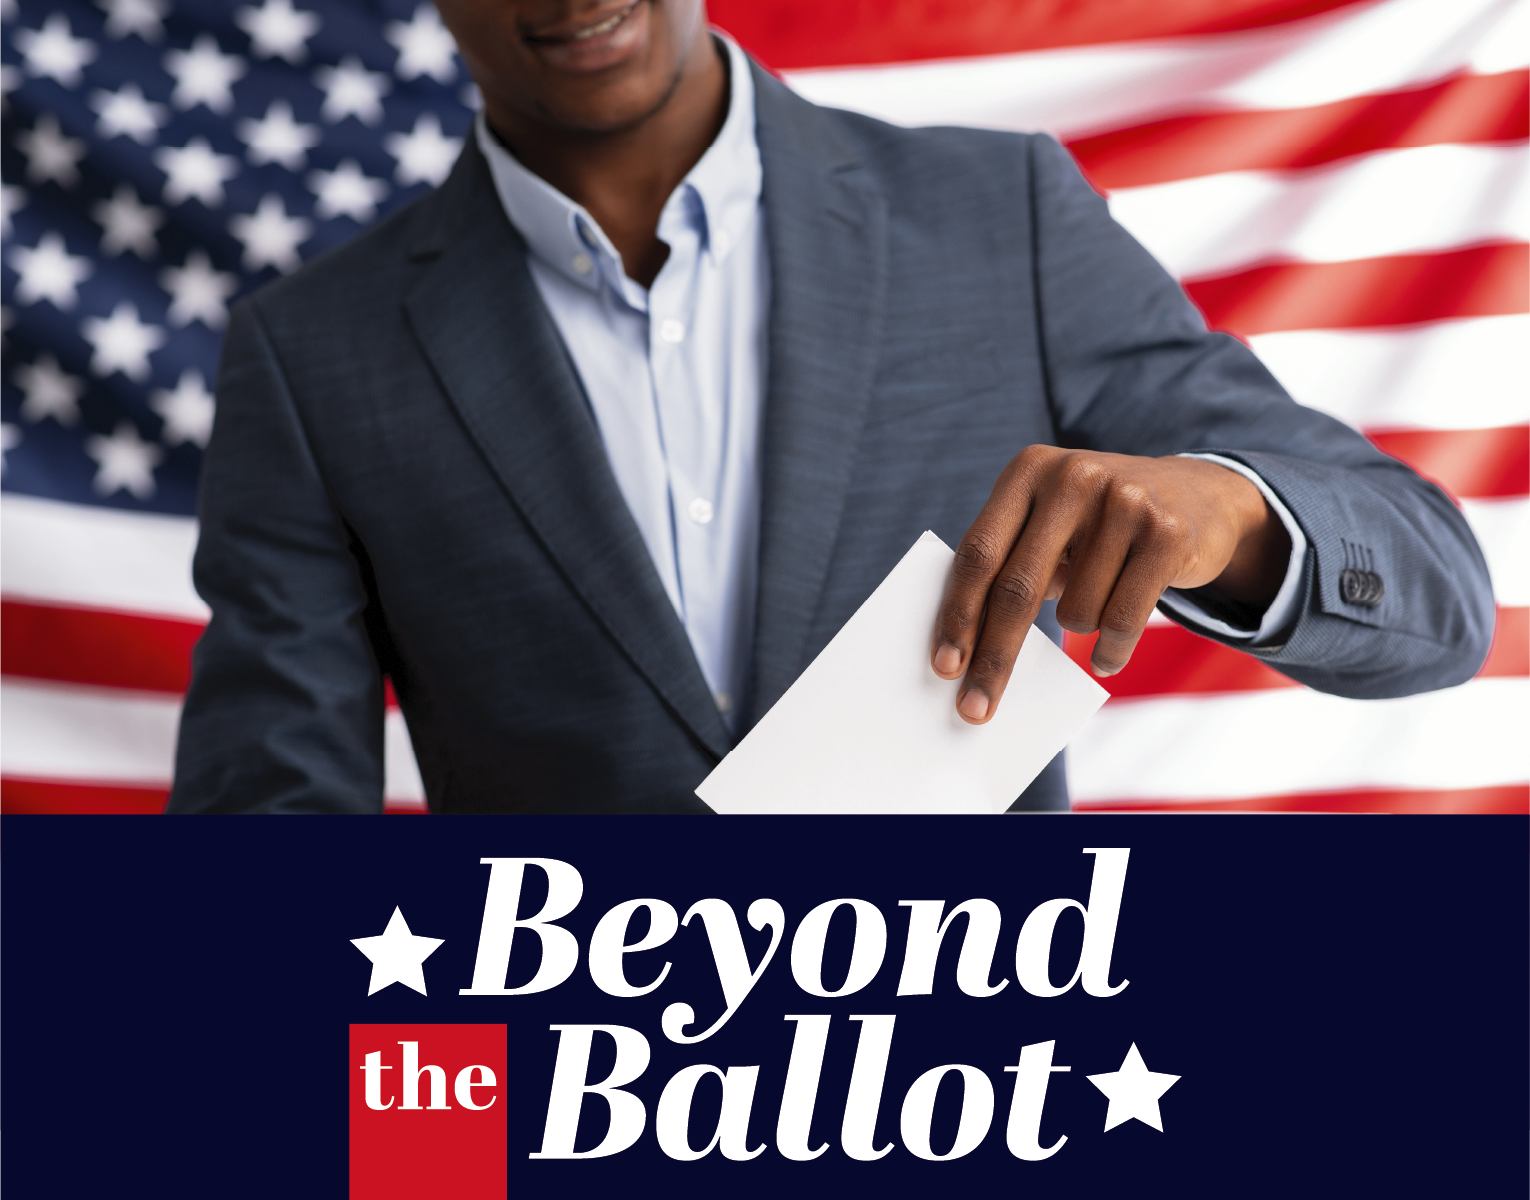 Black Man placing ballot into ballot box with an american flag background and the words Beyond the Ballot on navy background in foreground